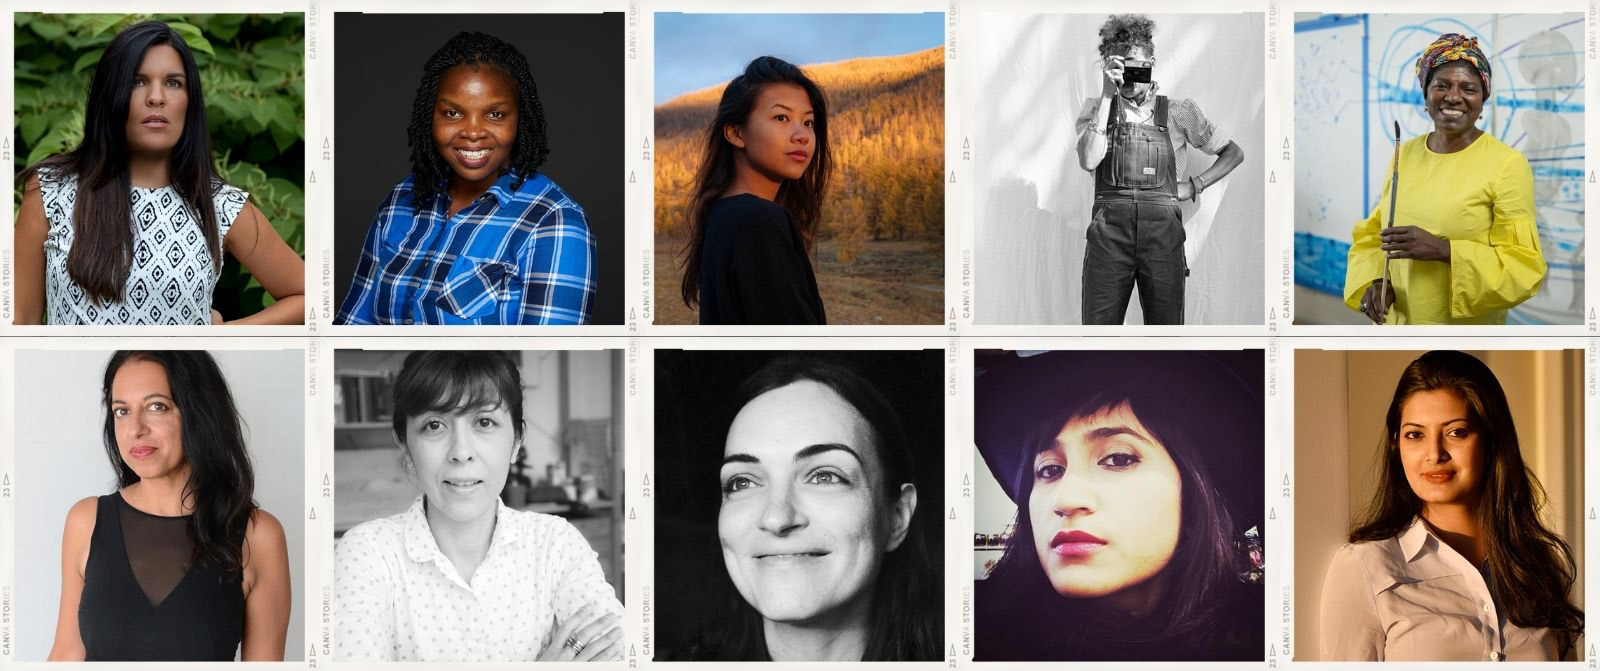 10 Women Photographers Receiving Recognition in 2021